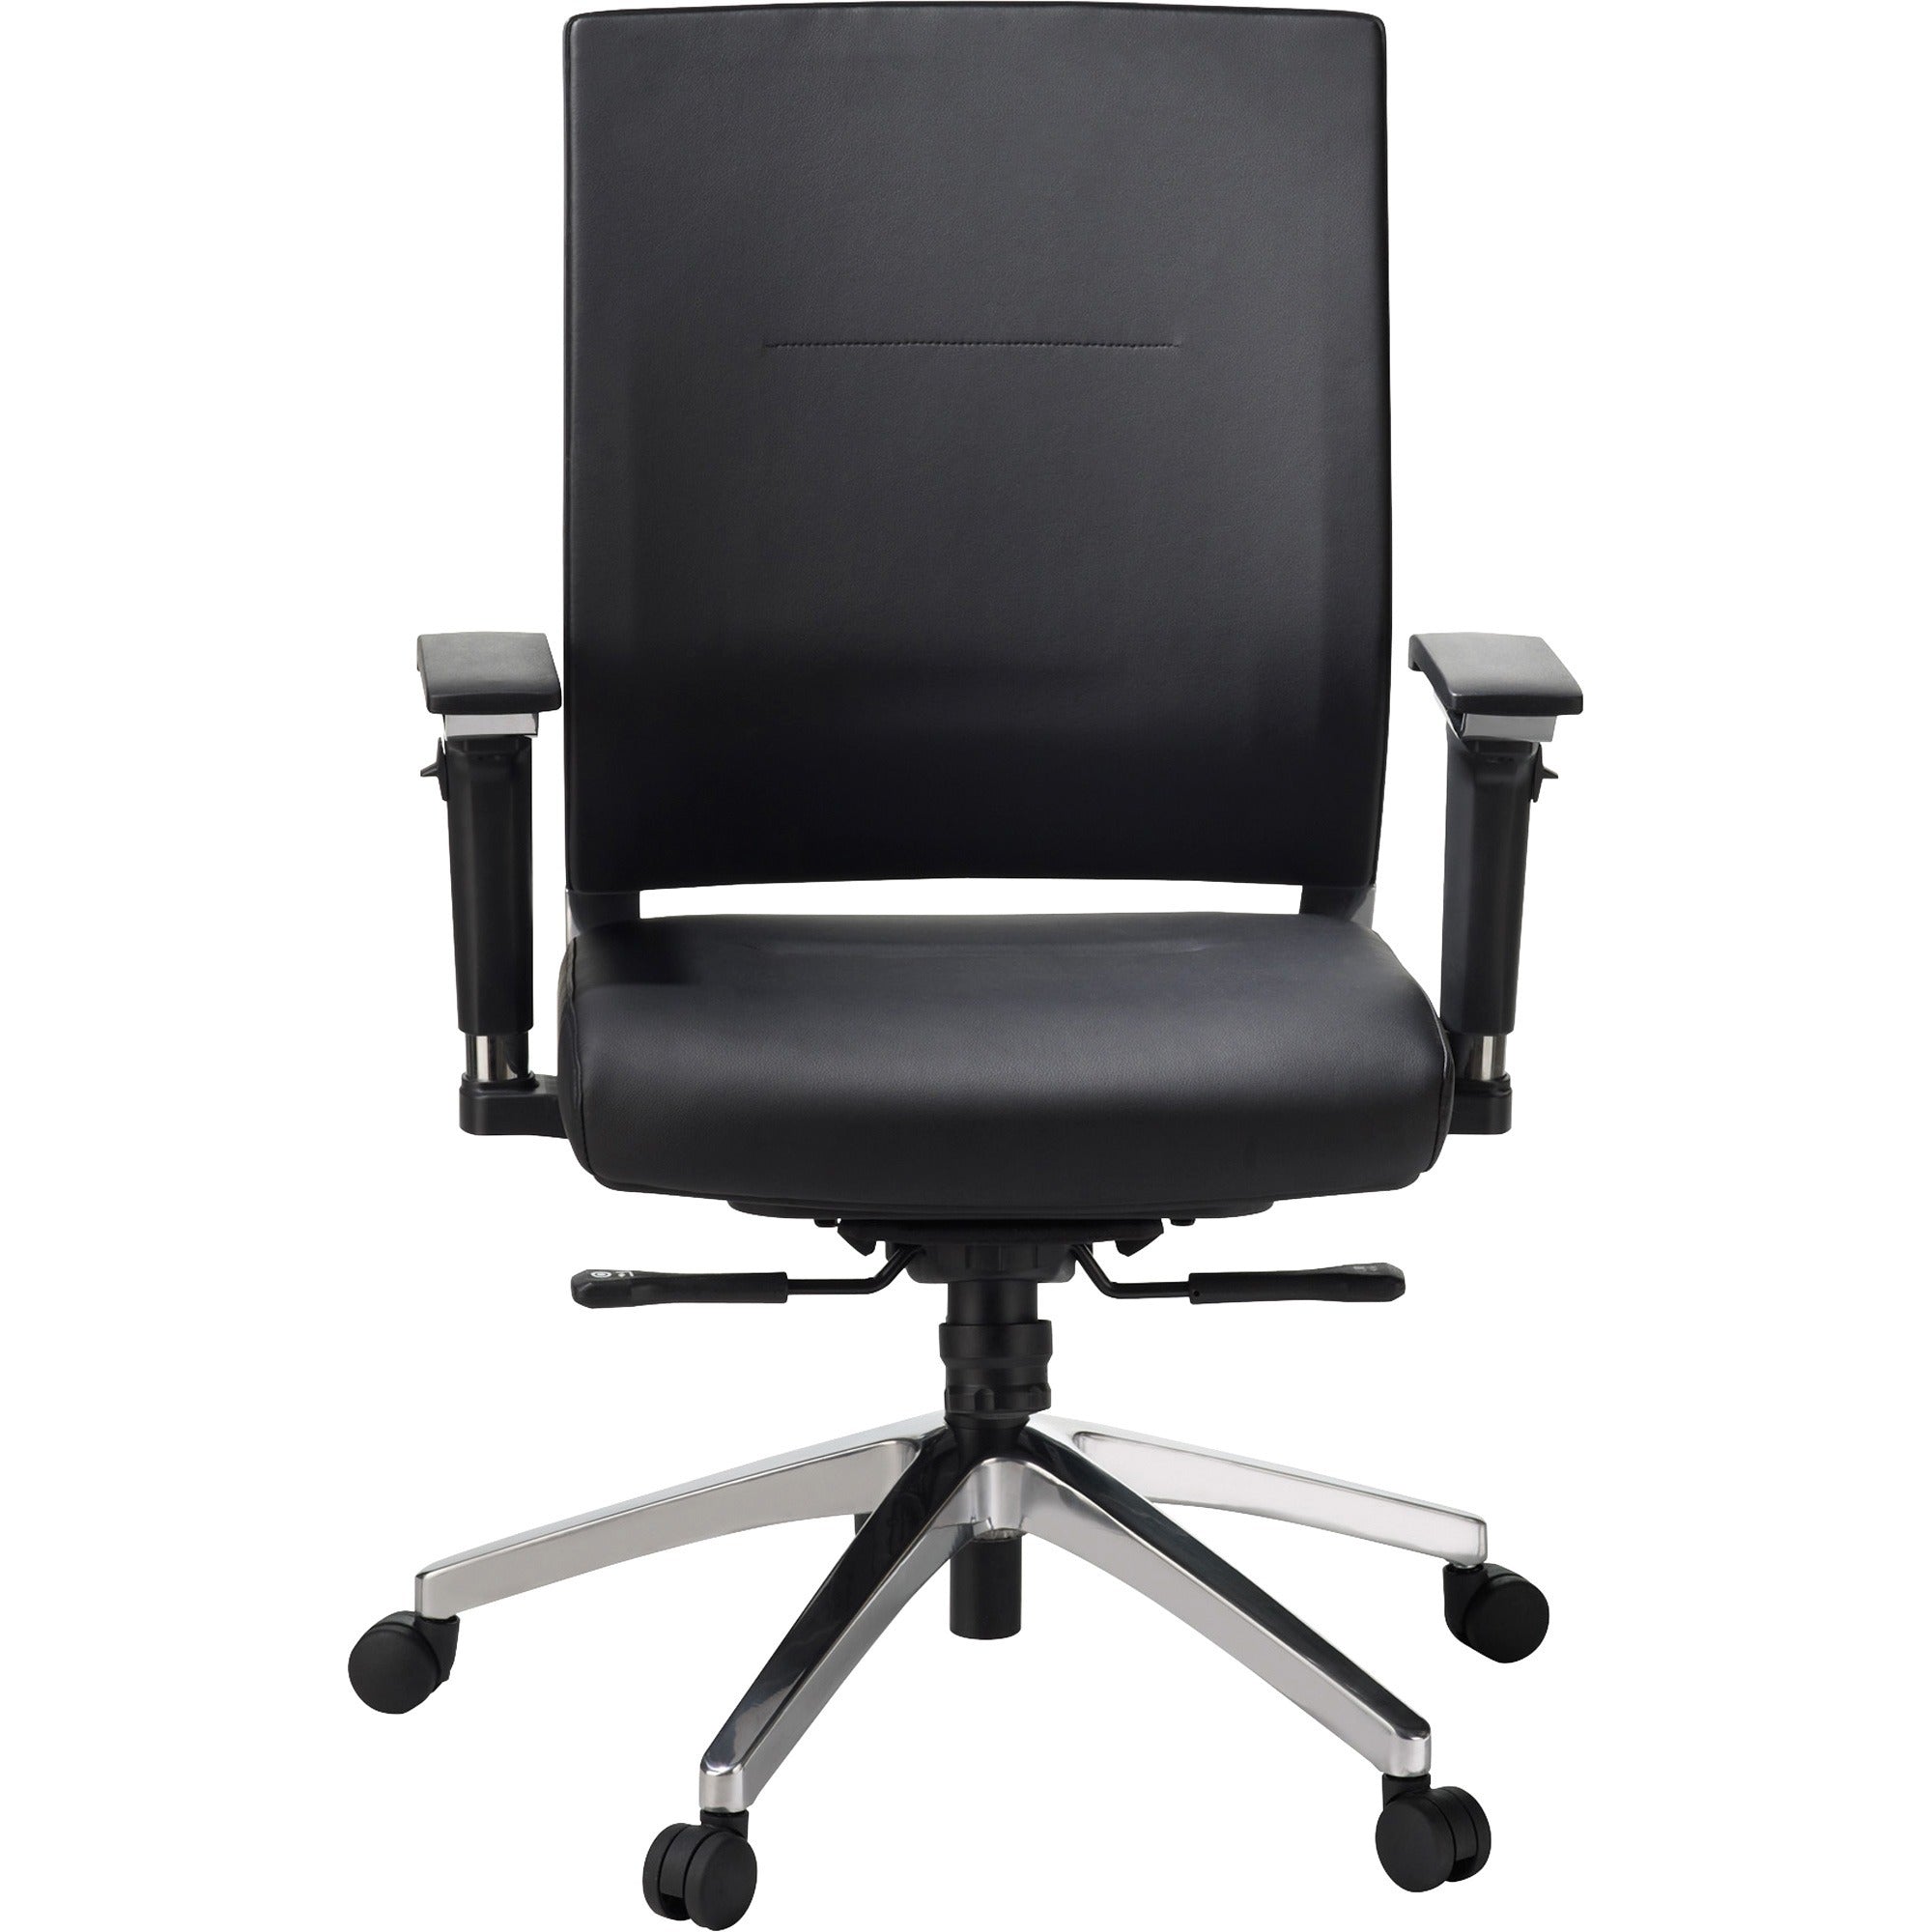 Lorell Heavy-duty Full-Function Executive Office Chair - Black Leather Seat - 5-star Base - Black - 1 Each - 